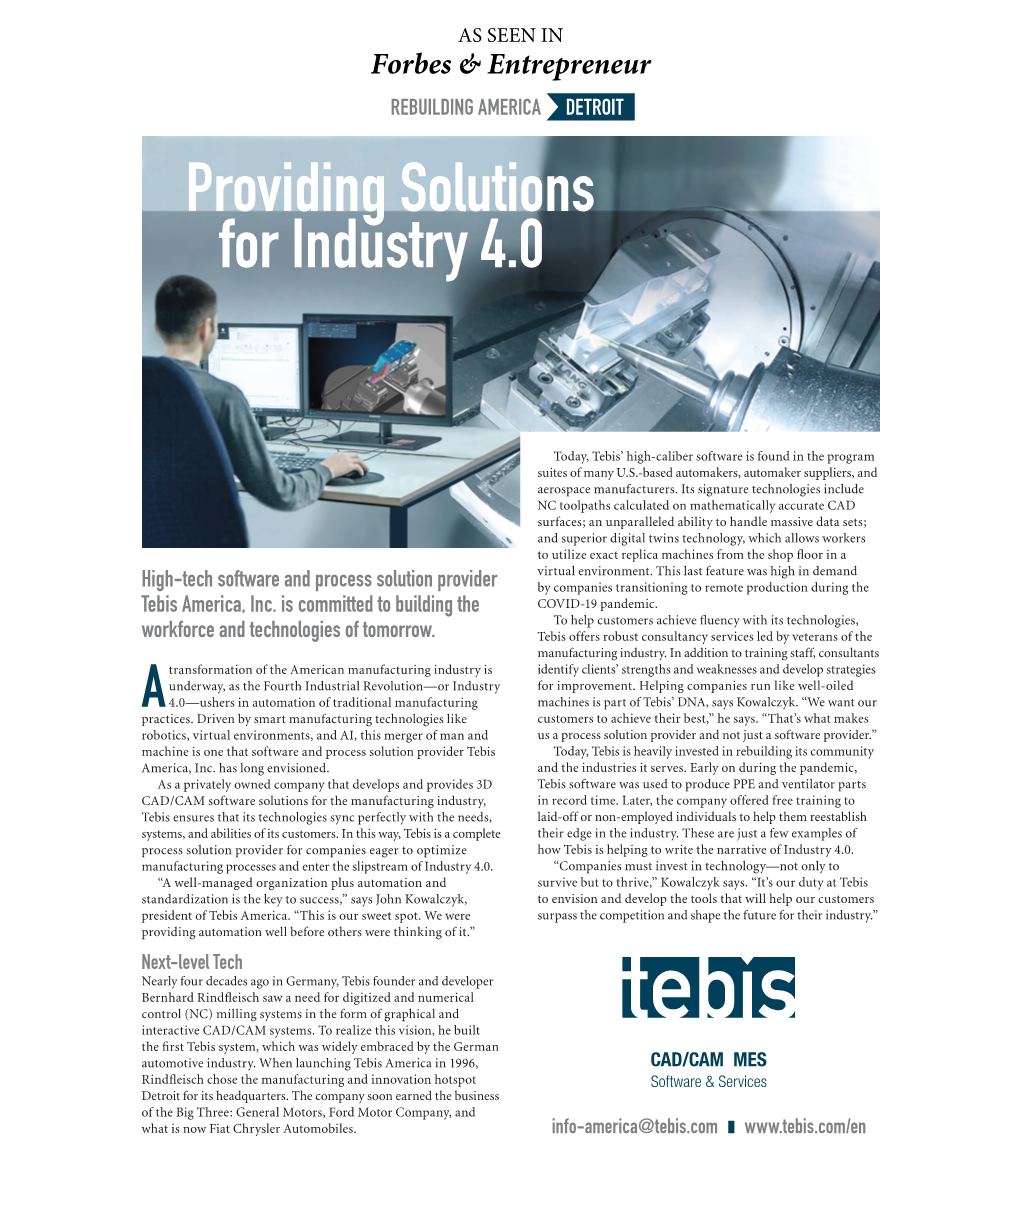 Providing Solutions for Industry 4.0